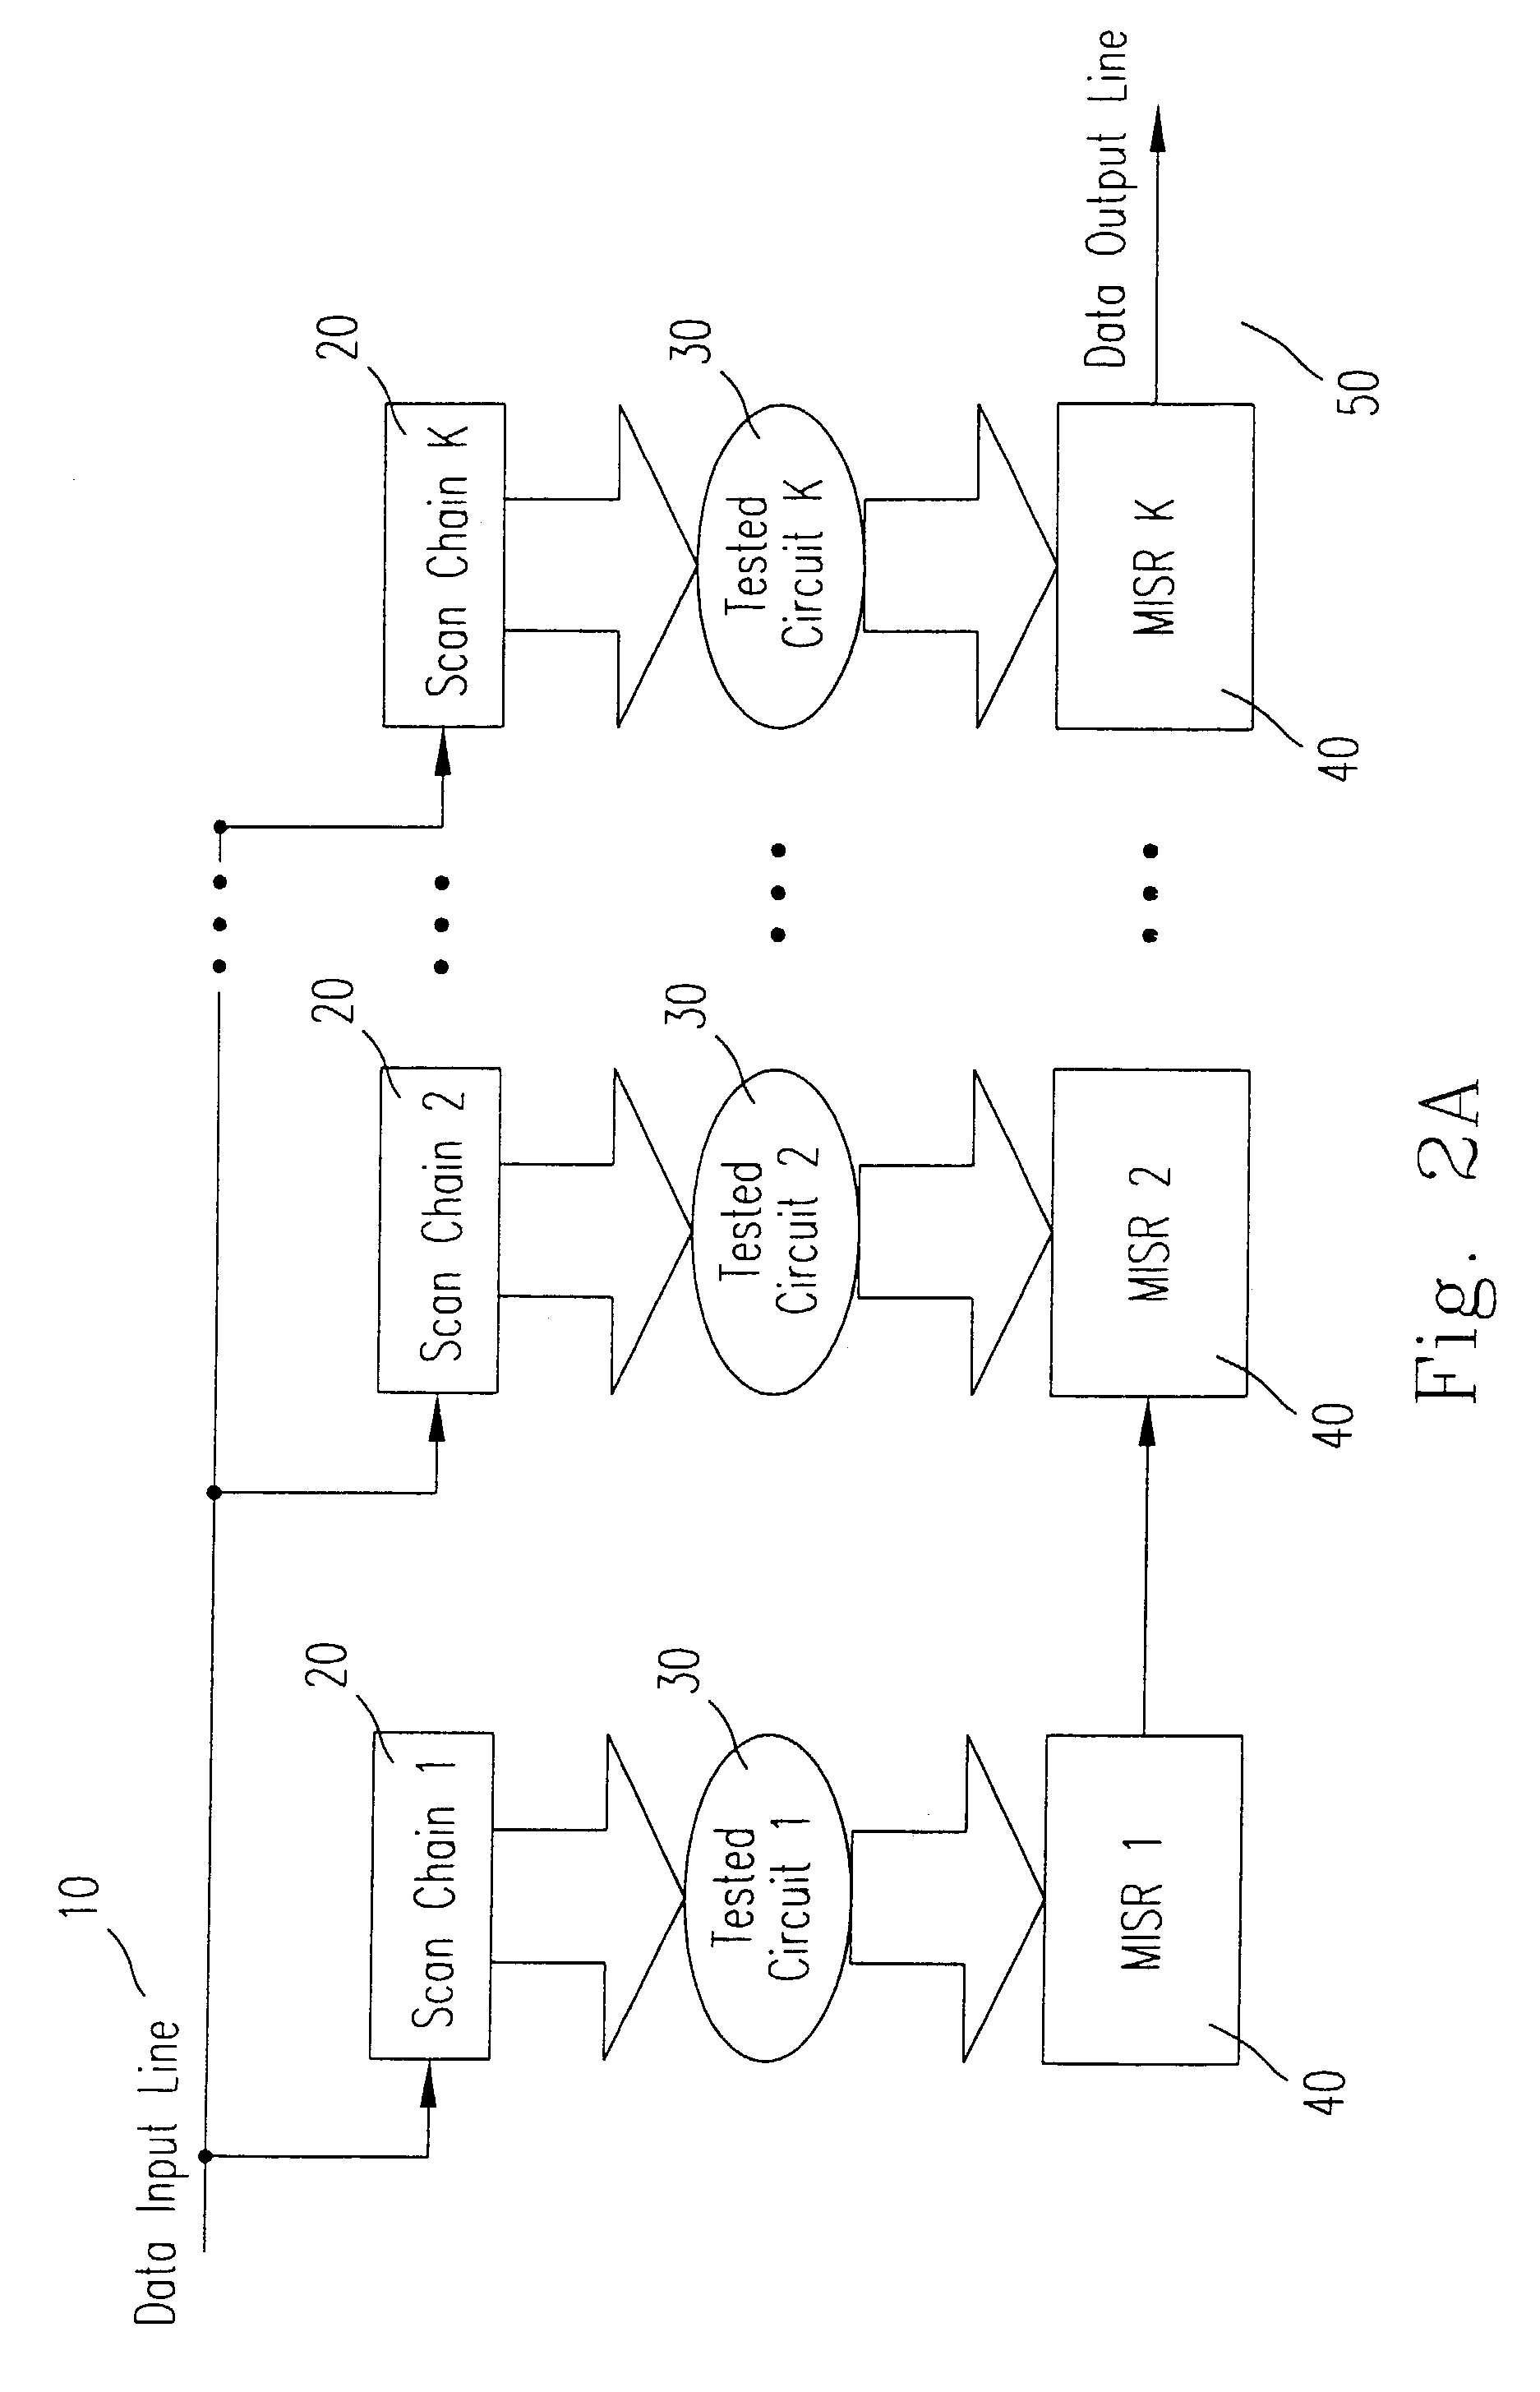 Test method and architecture for circuits having inputs